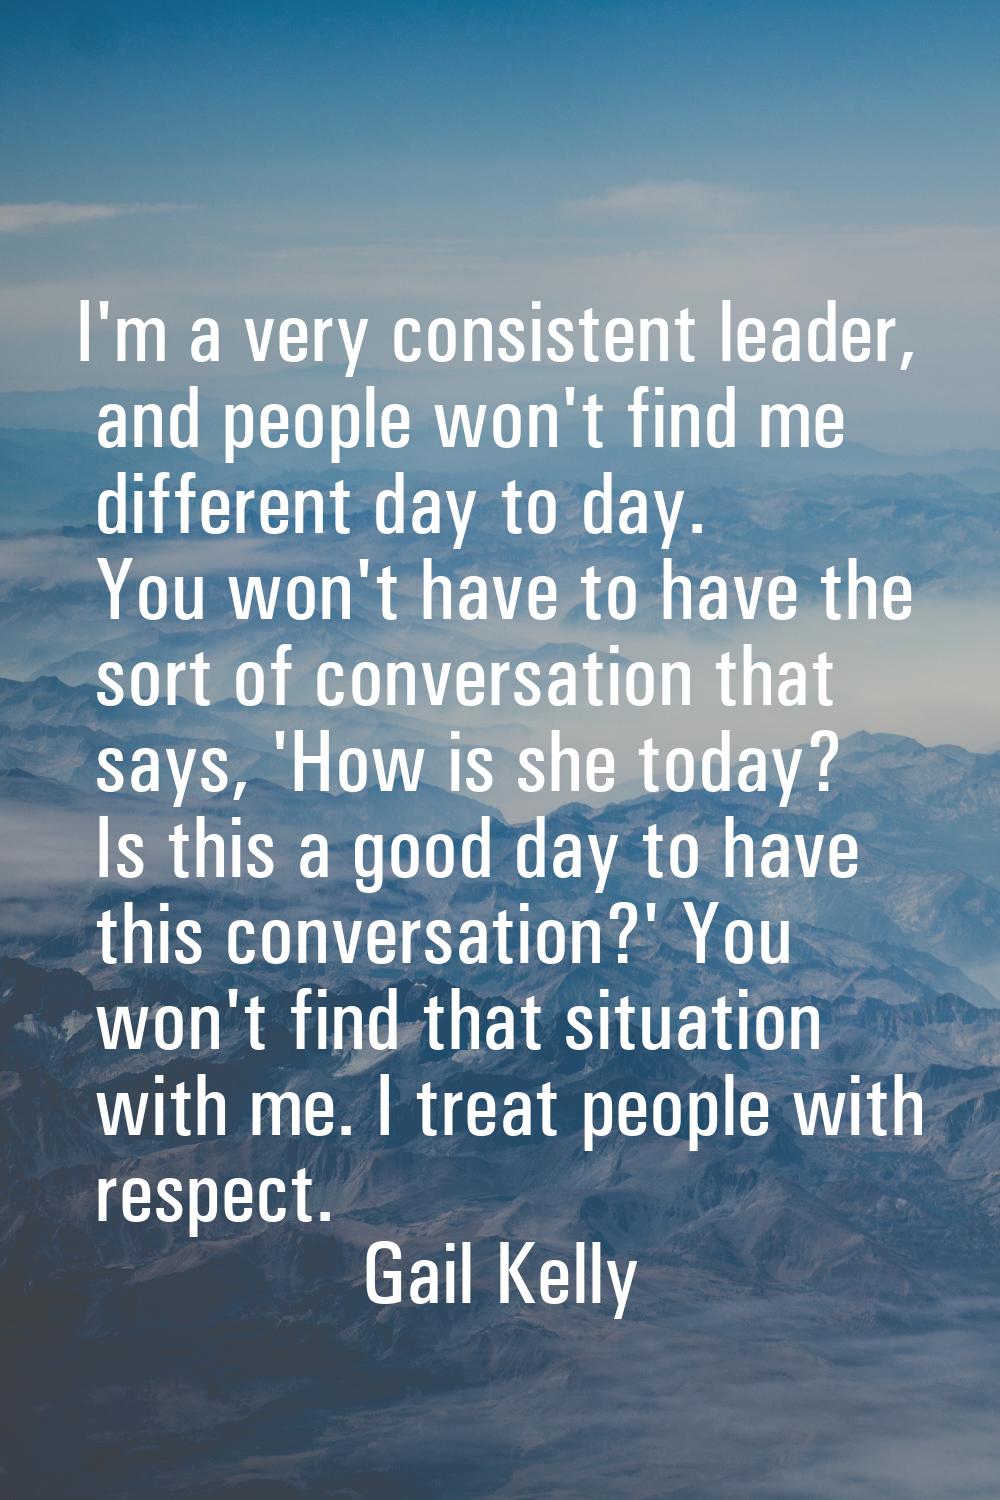 I'm a very consistent leader, and people won't find me different day to day. You won't have to have